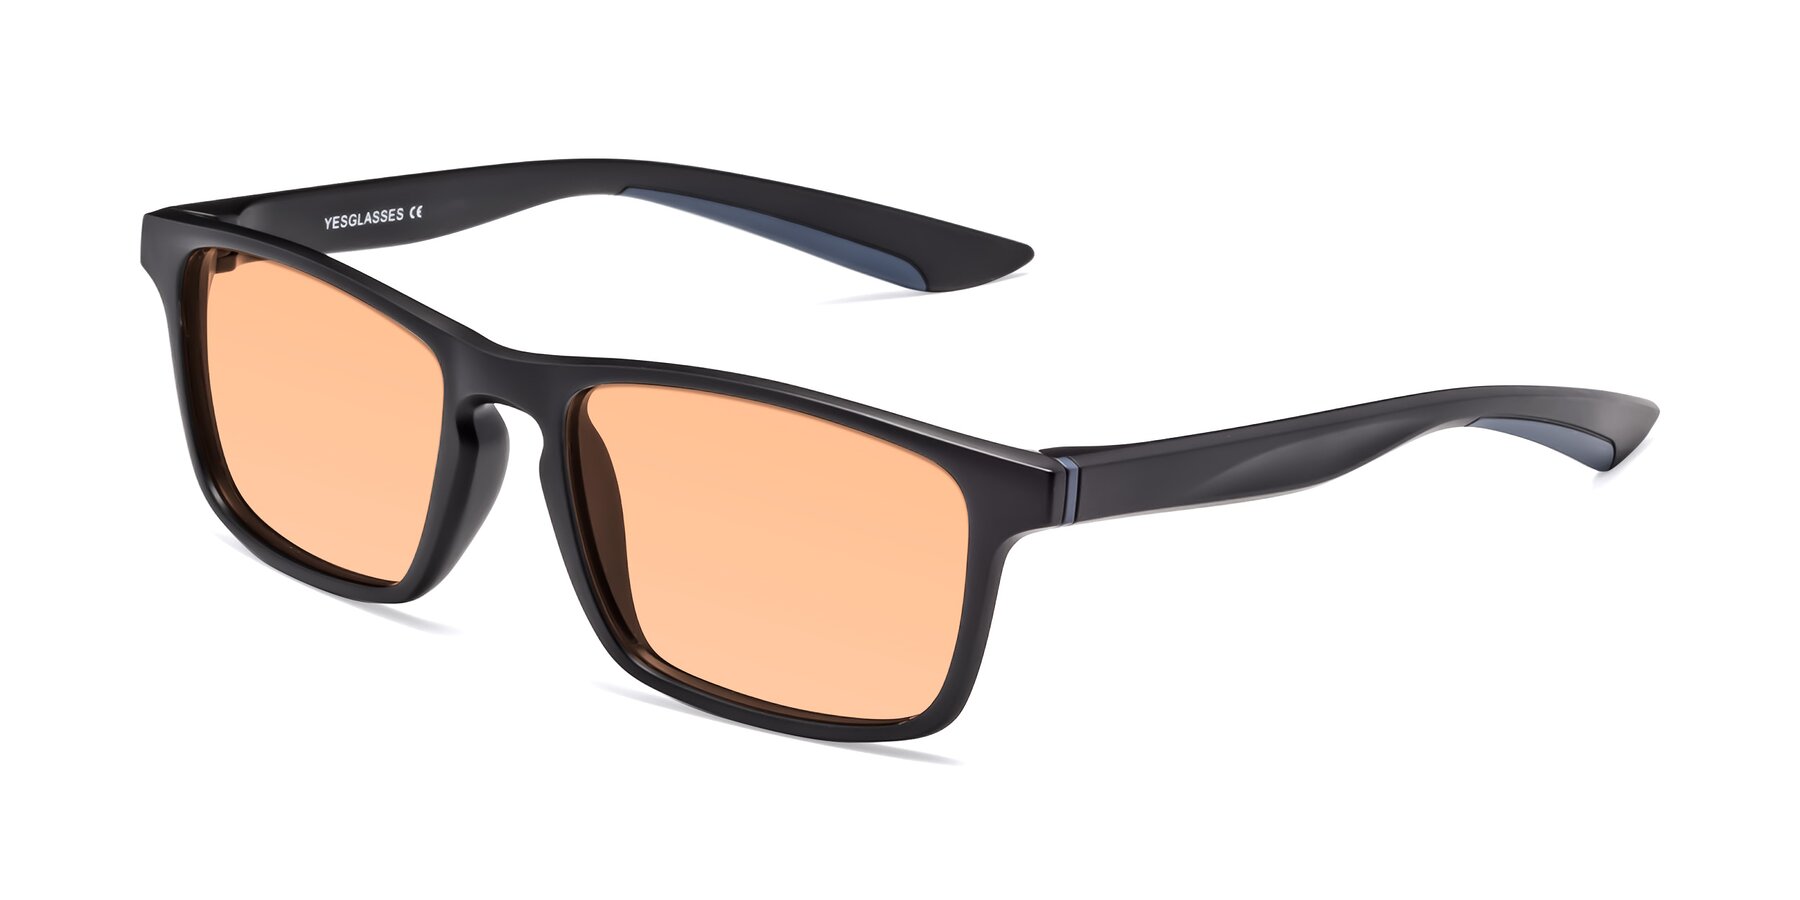 Angle of Passion in Matte Black-Blue with Light Orange Tinted Lenses